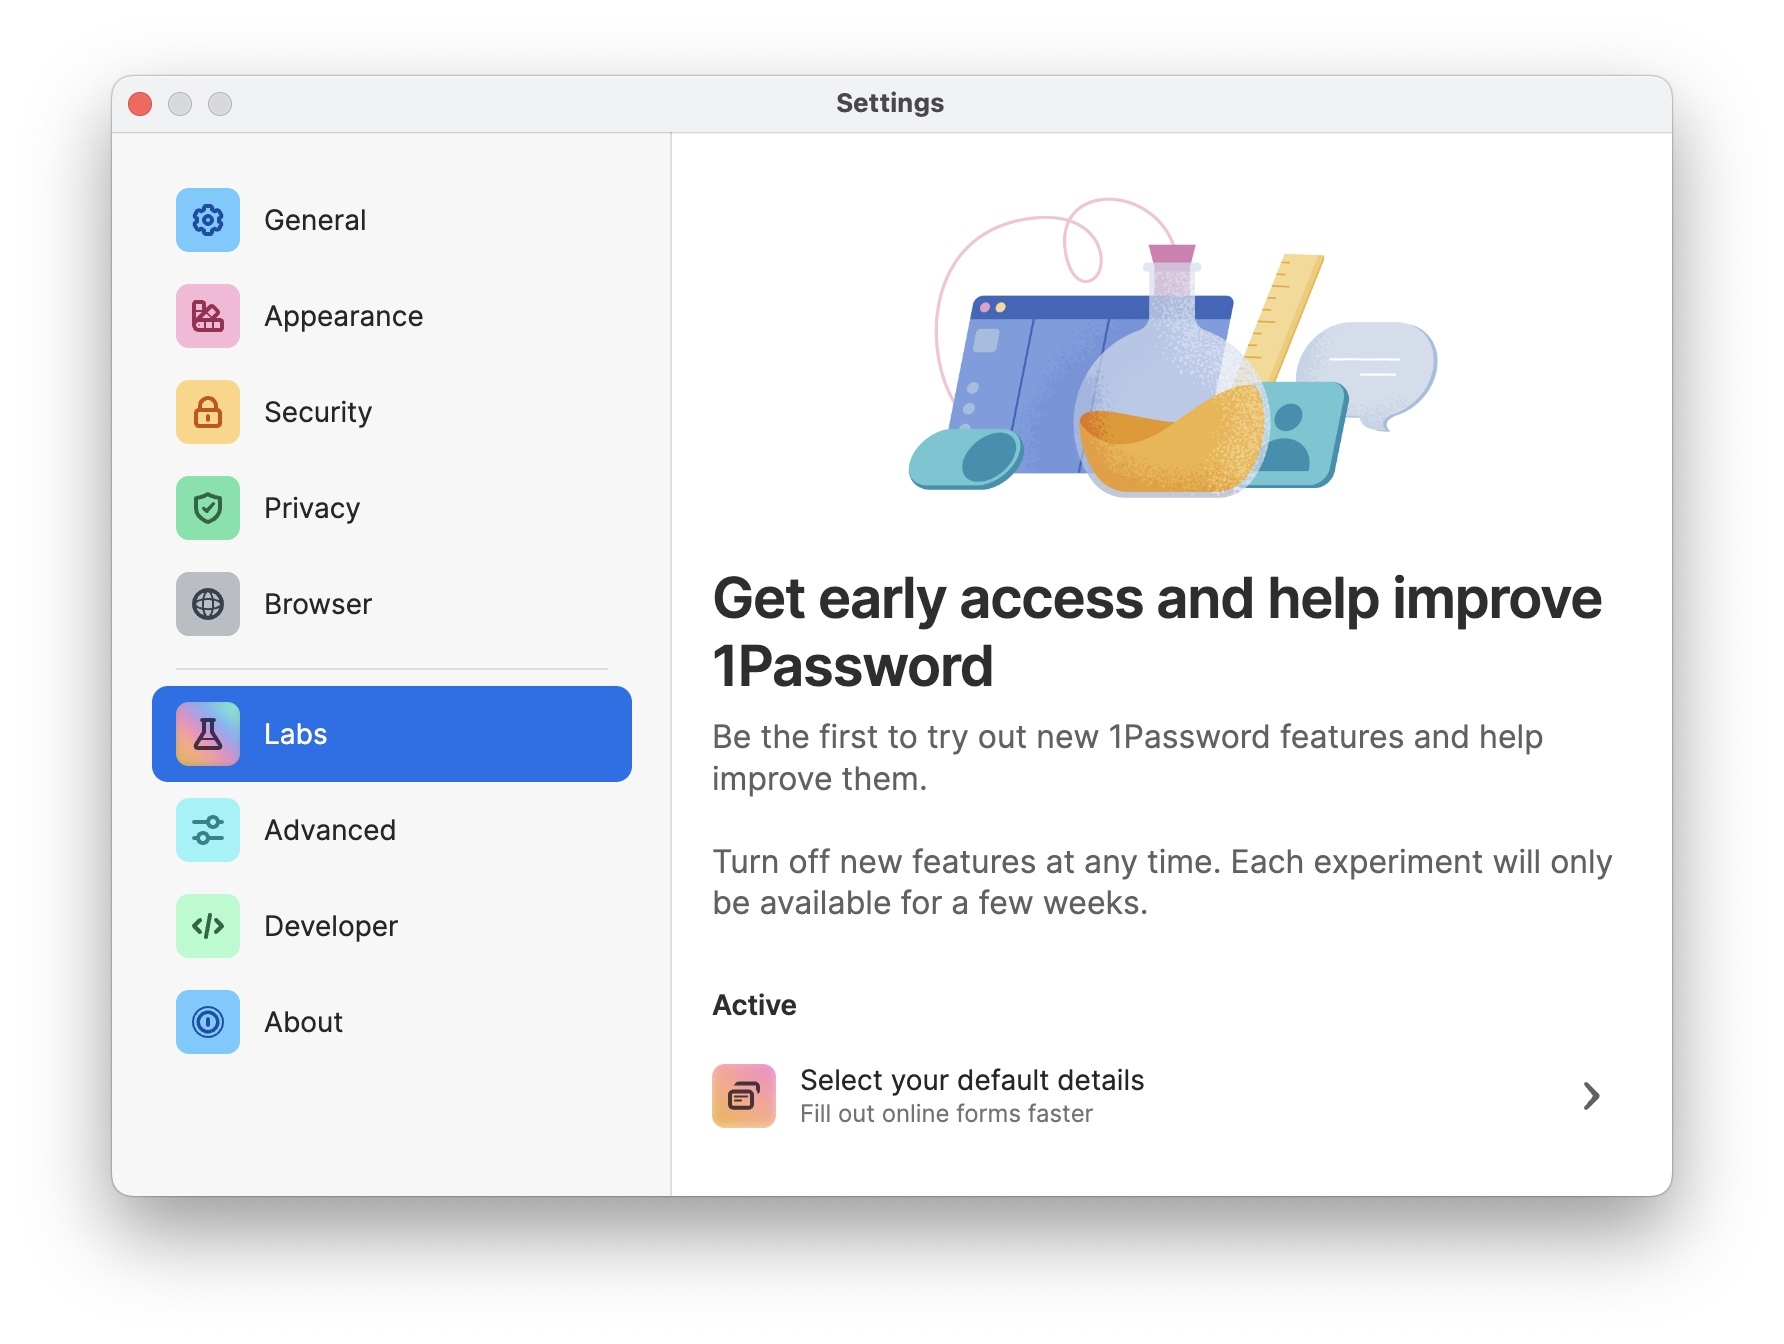 A screenshot of the 1Password app's Settings menu with the Labs tab highlighted.